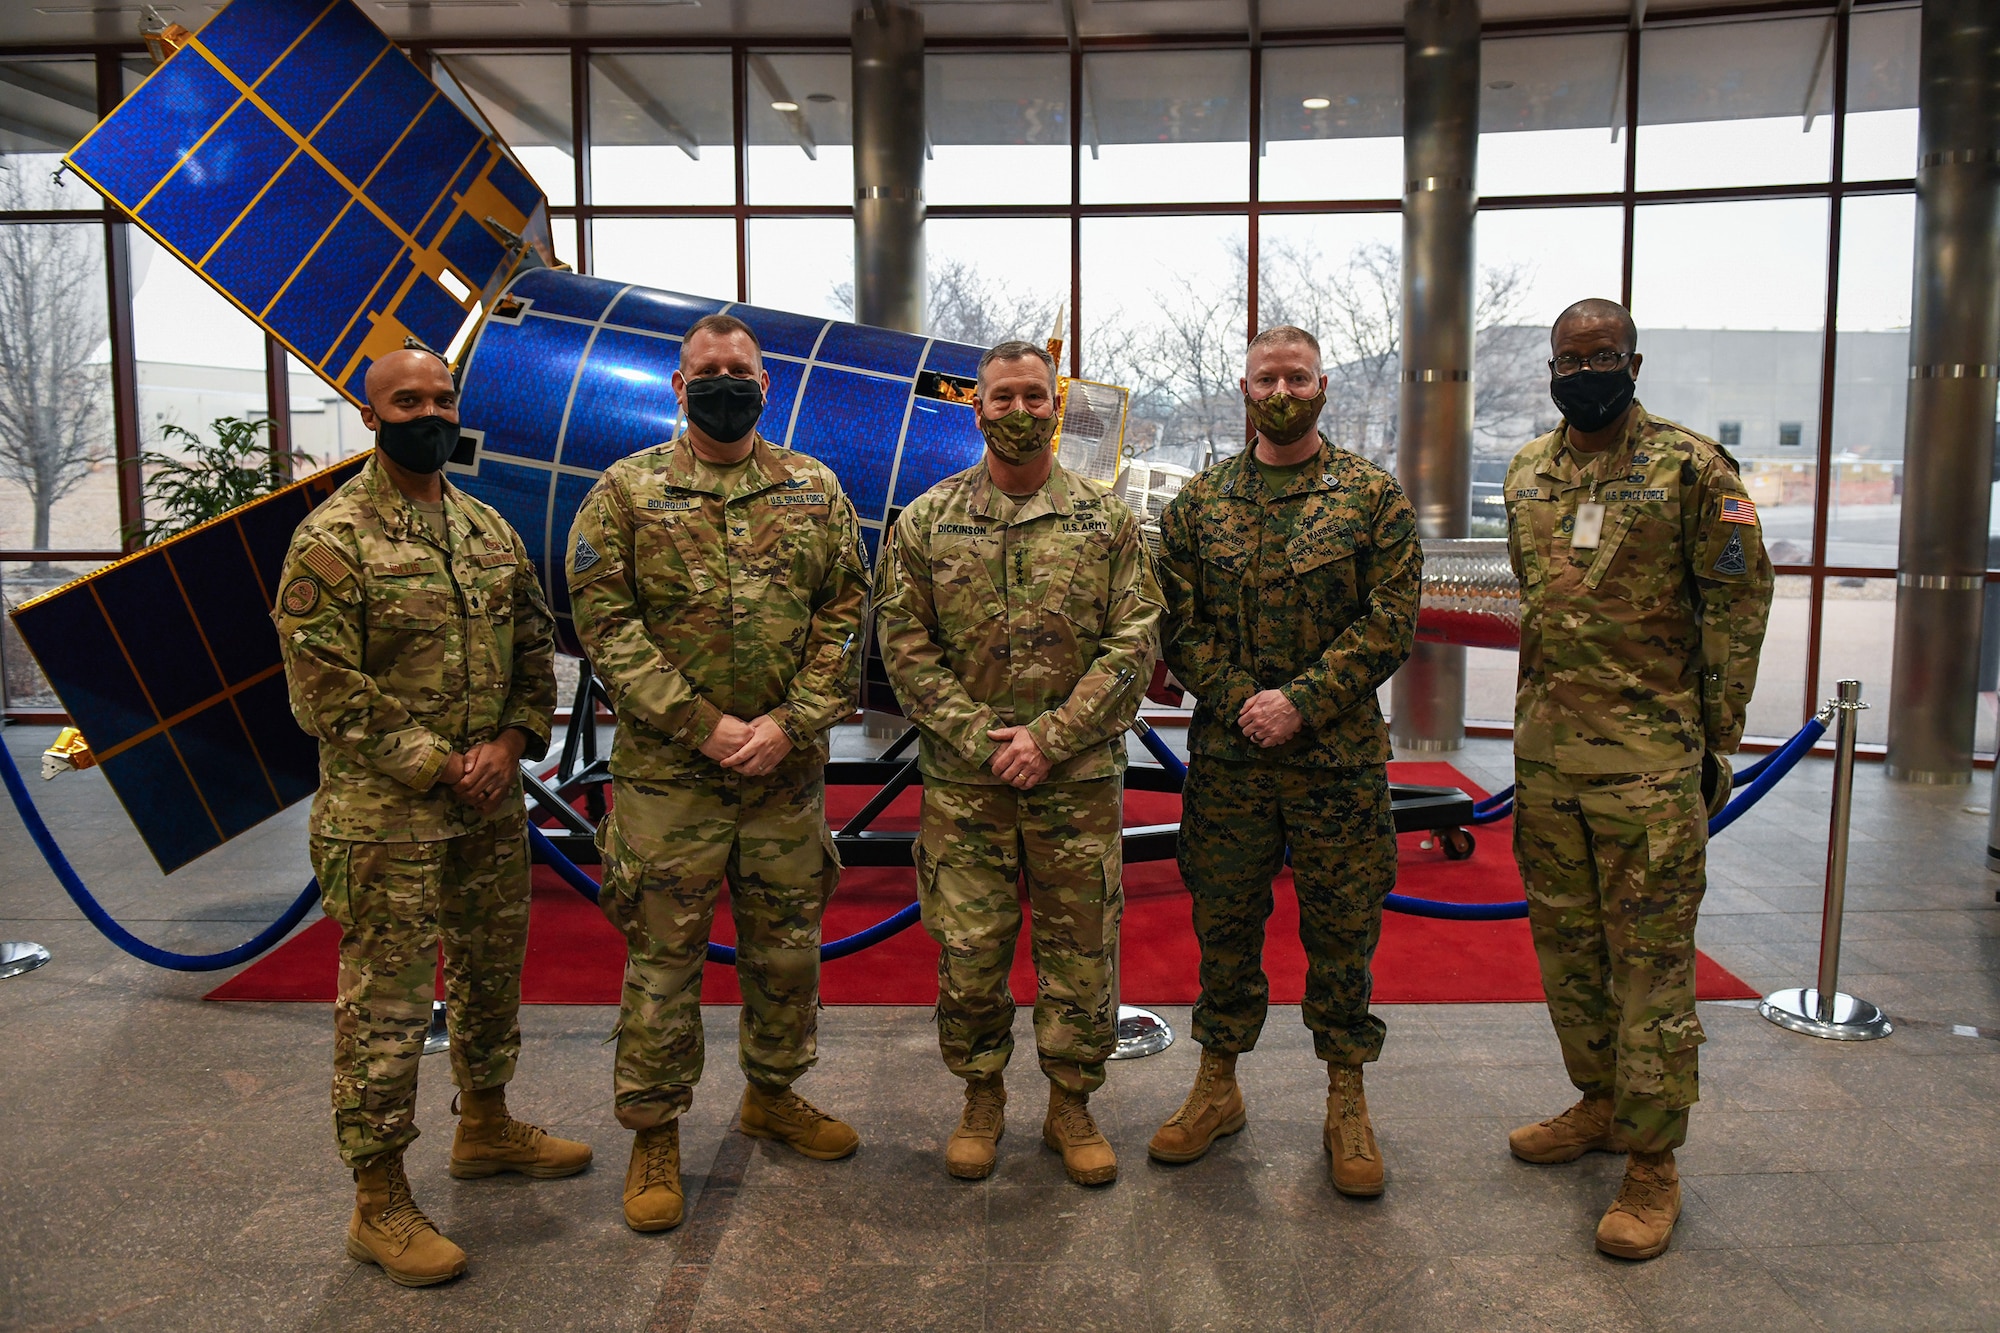 From left to right, U.S. Air Force Lt. Col. Trevor Hollis, Space Delta 4 deputy commander, U.S. Space Force Col. Richard Bourquin, DEL 4 commander, U.S. Army Gen. James Dickinson, U.S. Space Command commander, U.S. Marine Corps Master Gunnery Sgt. Scott H. Stalker, USSPACECOM senior enlisted leader, and U.S. Space Force Chief Master Sgt. Willie Frazier, DEL 4 senior enlisted leader, pose for a group photo in the Mission Control Station lobby on Buckley Air Force Base, Colo., Jan. 7, 2021.